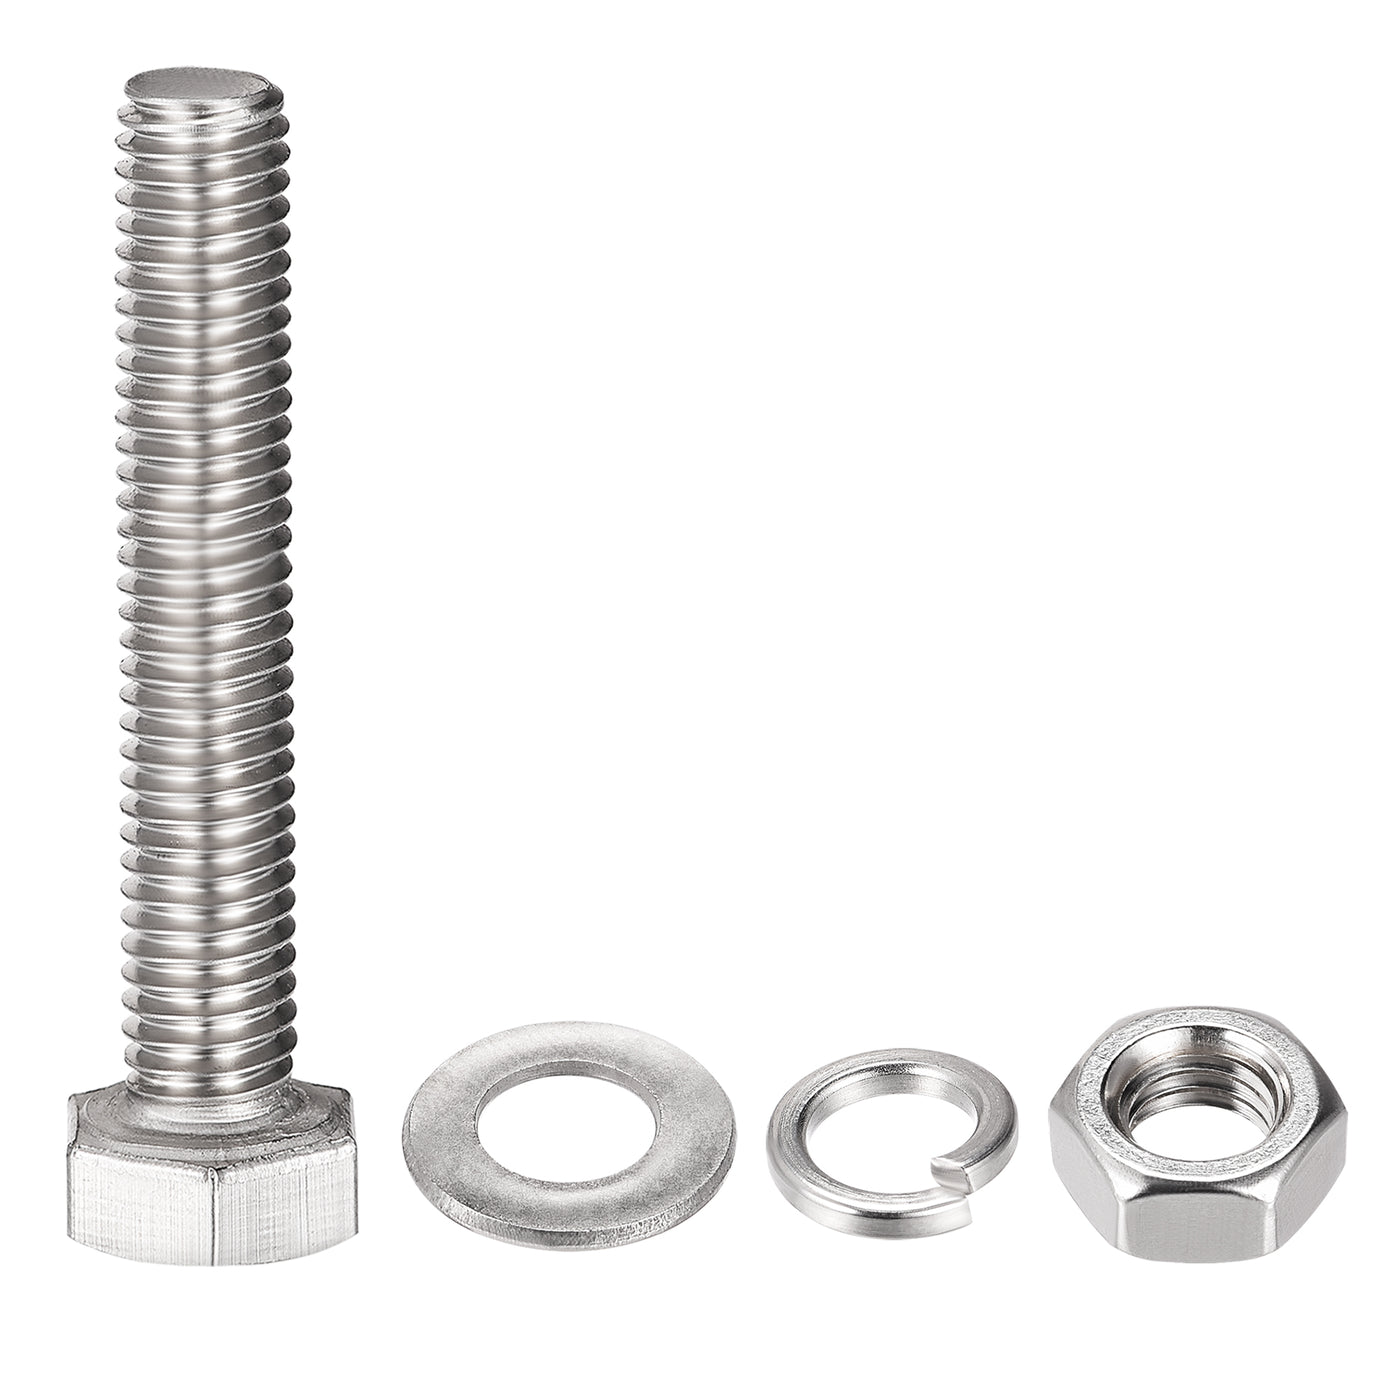 uxcell Uxcell Hex Head Screws Bolts, Nuts, Flat & Lock Washers Kits, 304 Stainless Steel Fully Thread Hexagon Bolts 4 Set